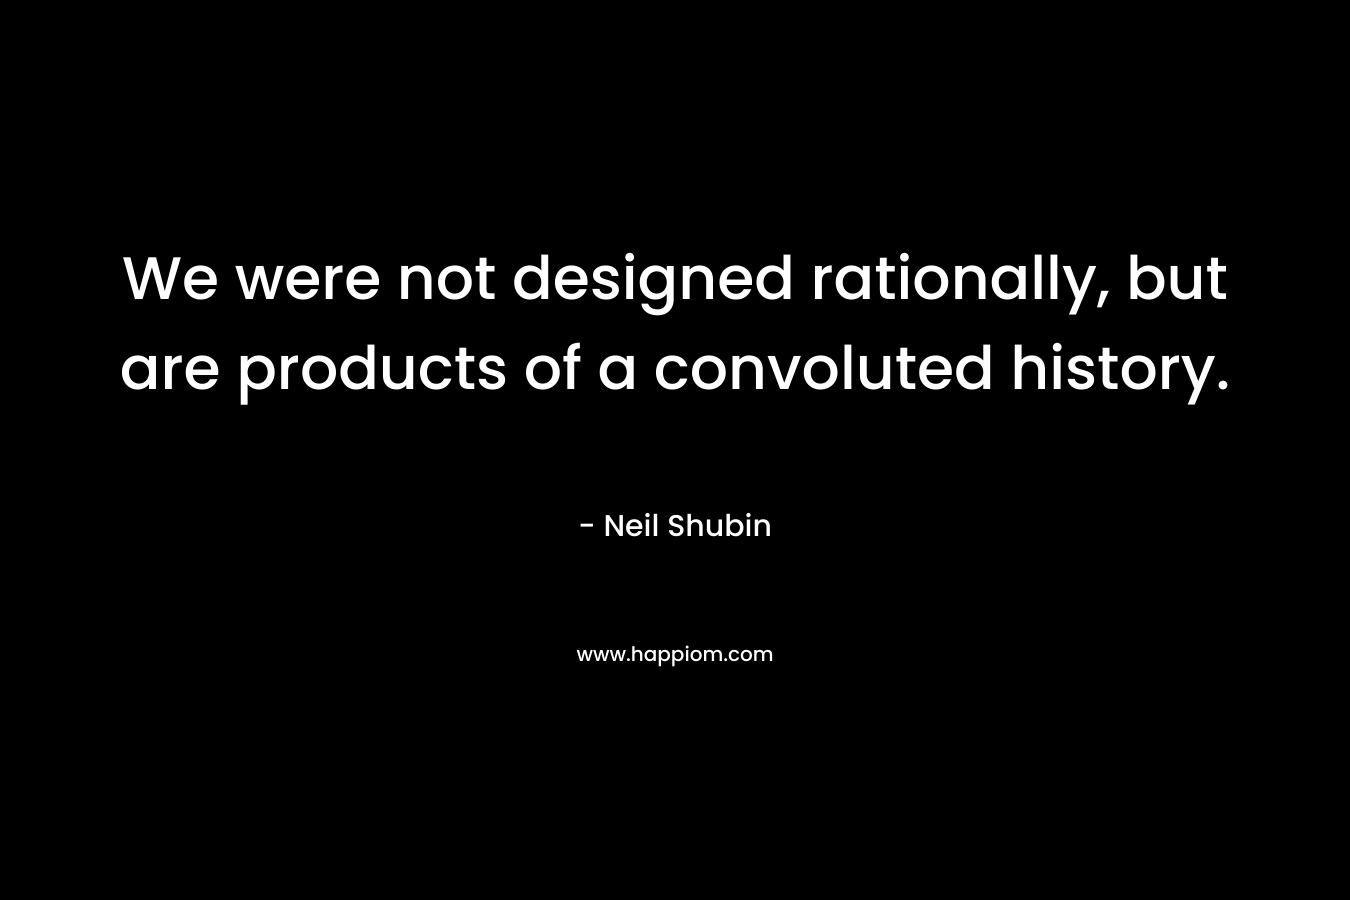 We were not designed rationally, but are products of a convoluted history. – Neil Shubin